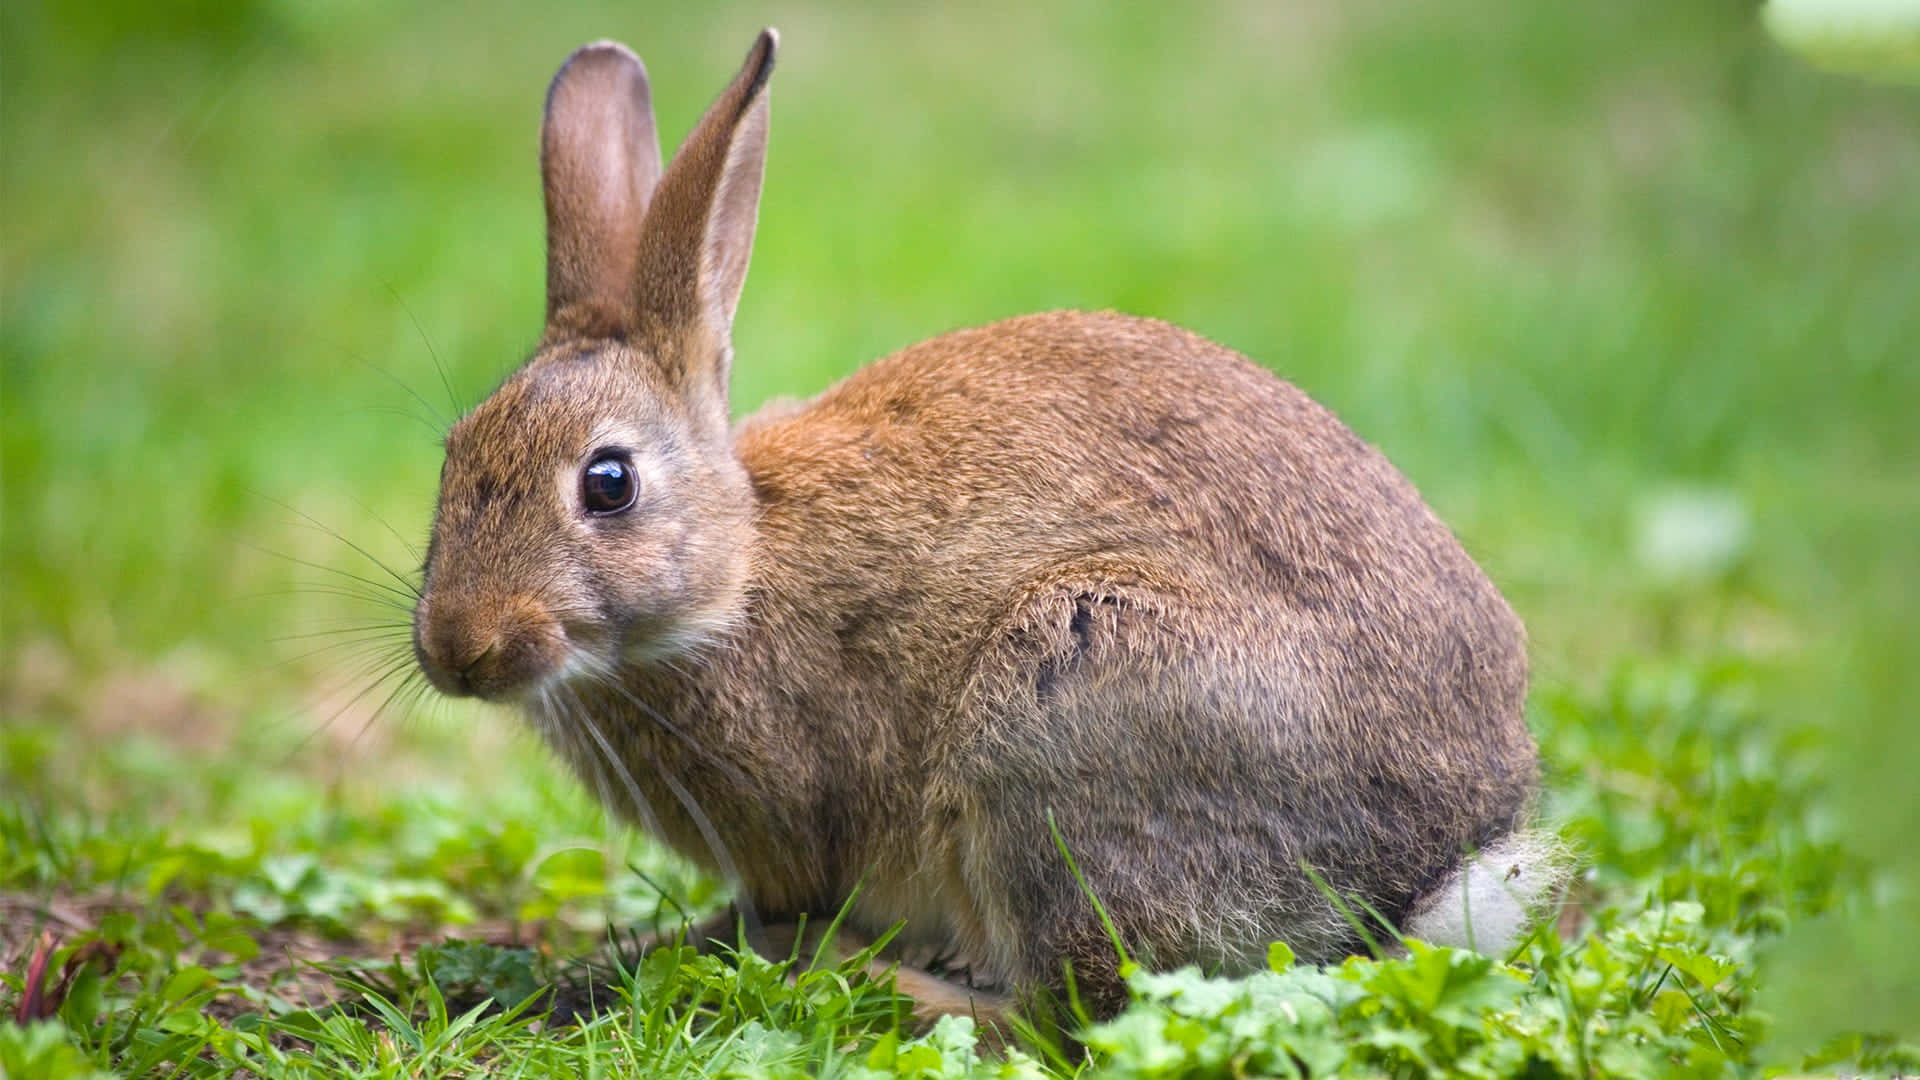 A Rabbit Sitting On The Grass In The Grass